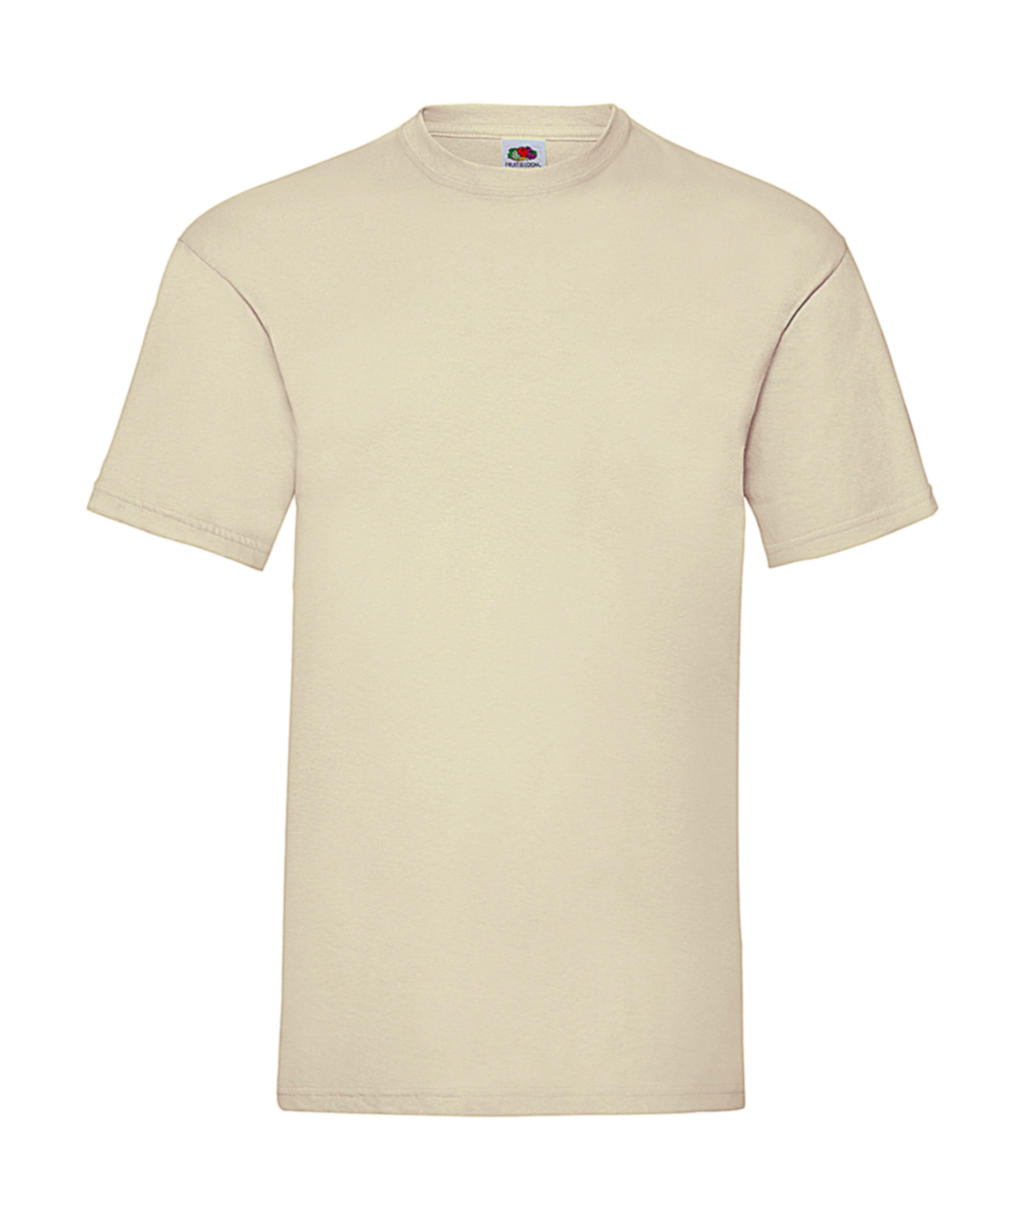  Valueweight Tee in Farbe Natural